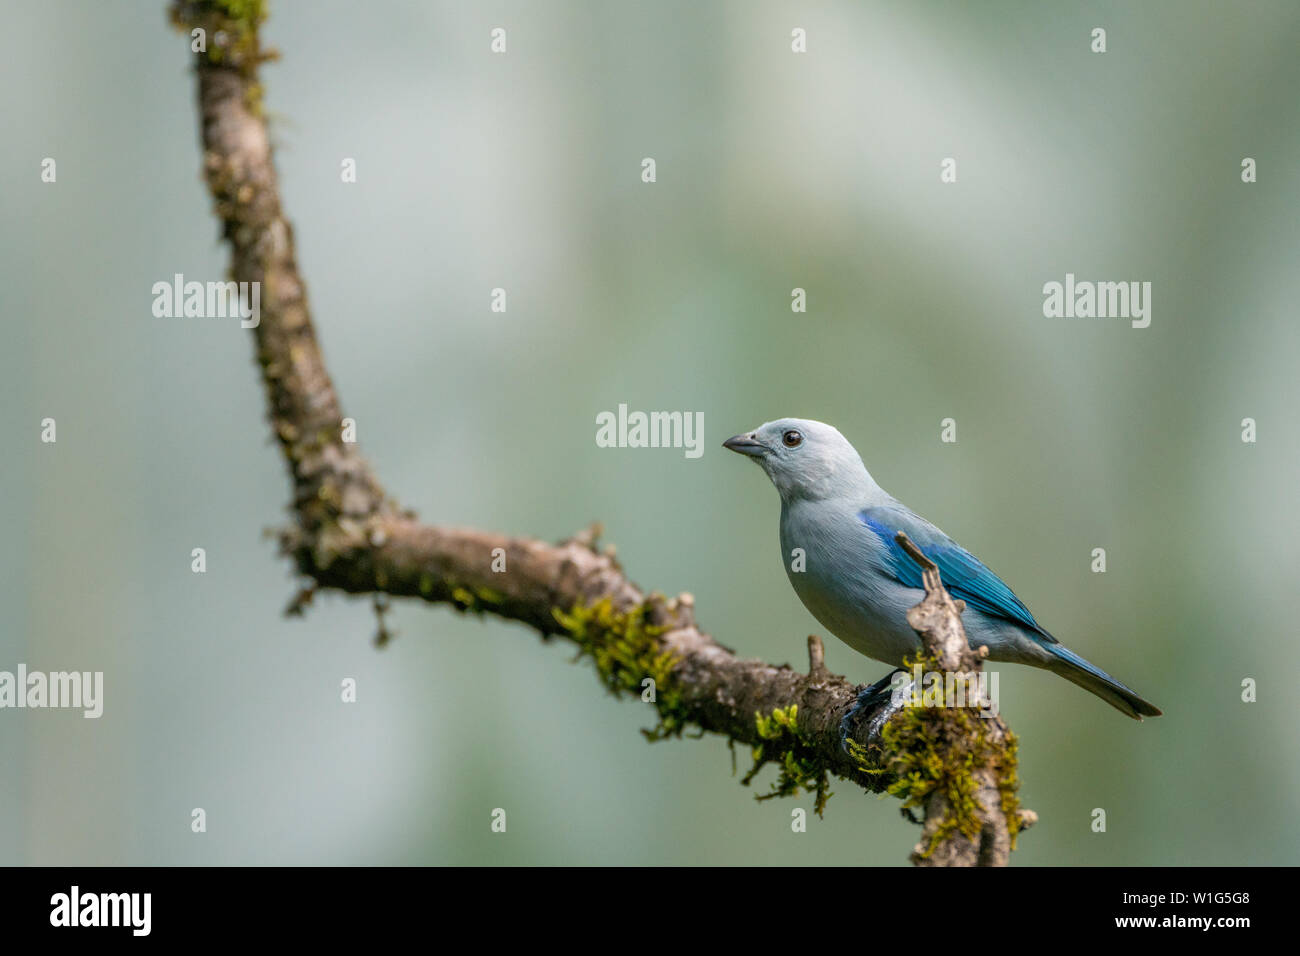 Blue-gray tanager (Thraupis episcopus) perches on a branch in Maquenque, Costa Rica Stock Photo